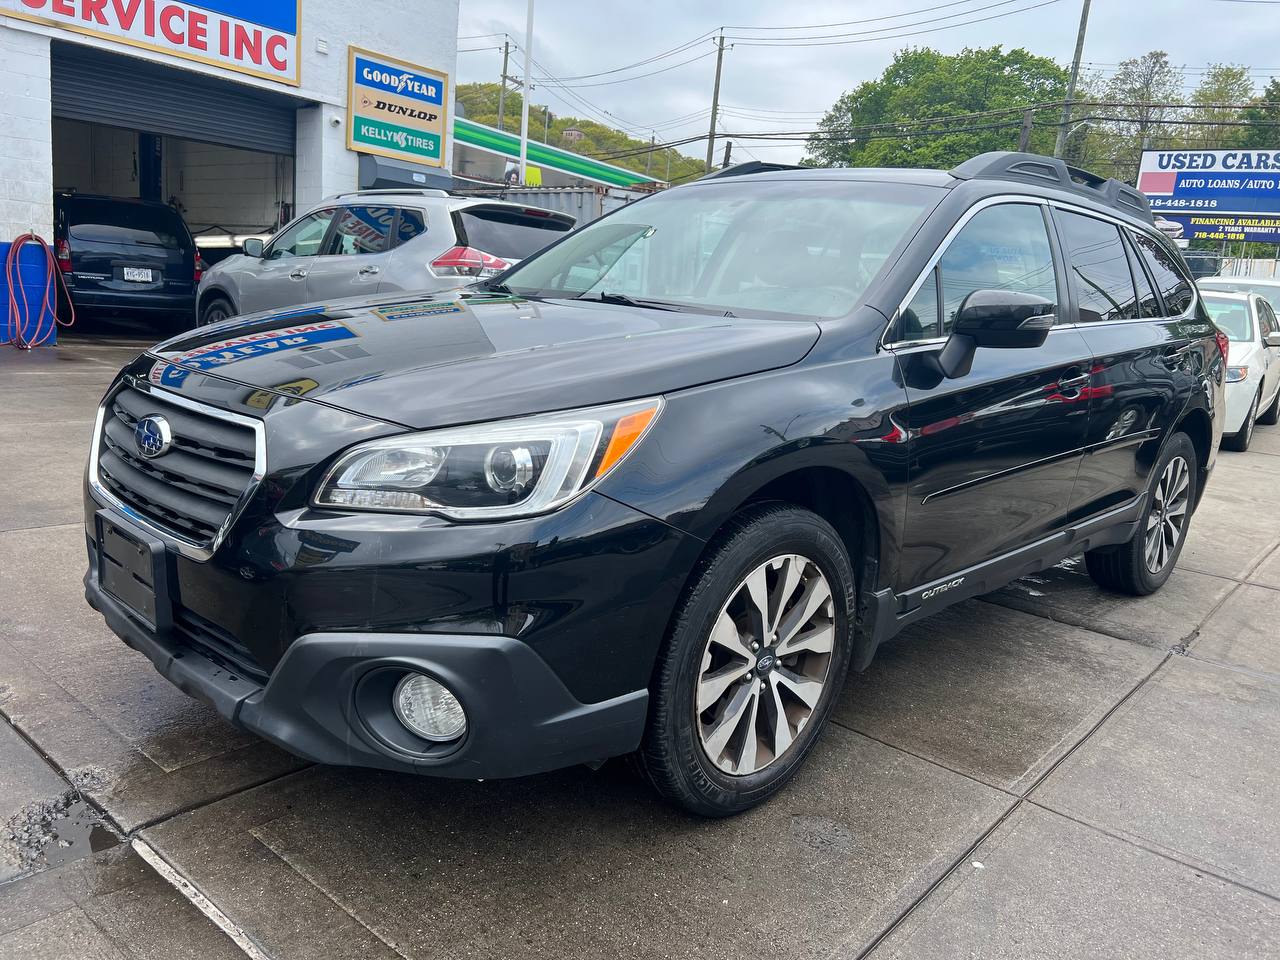 Used Car - 2015 Subaru Outback 2.5i Limited AWD for Sale in Staten Island, NY